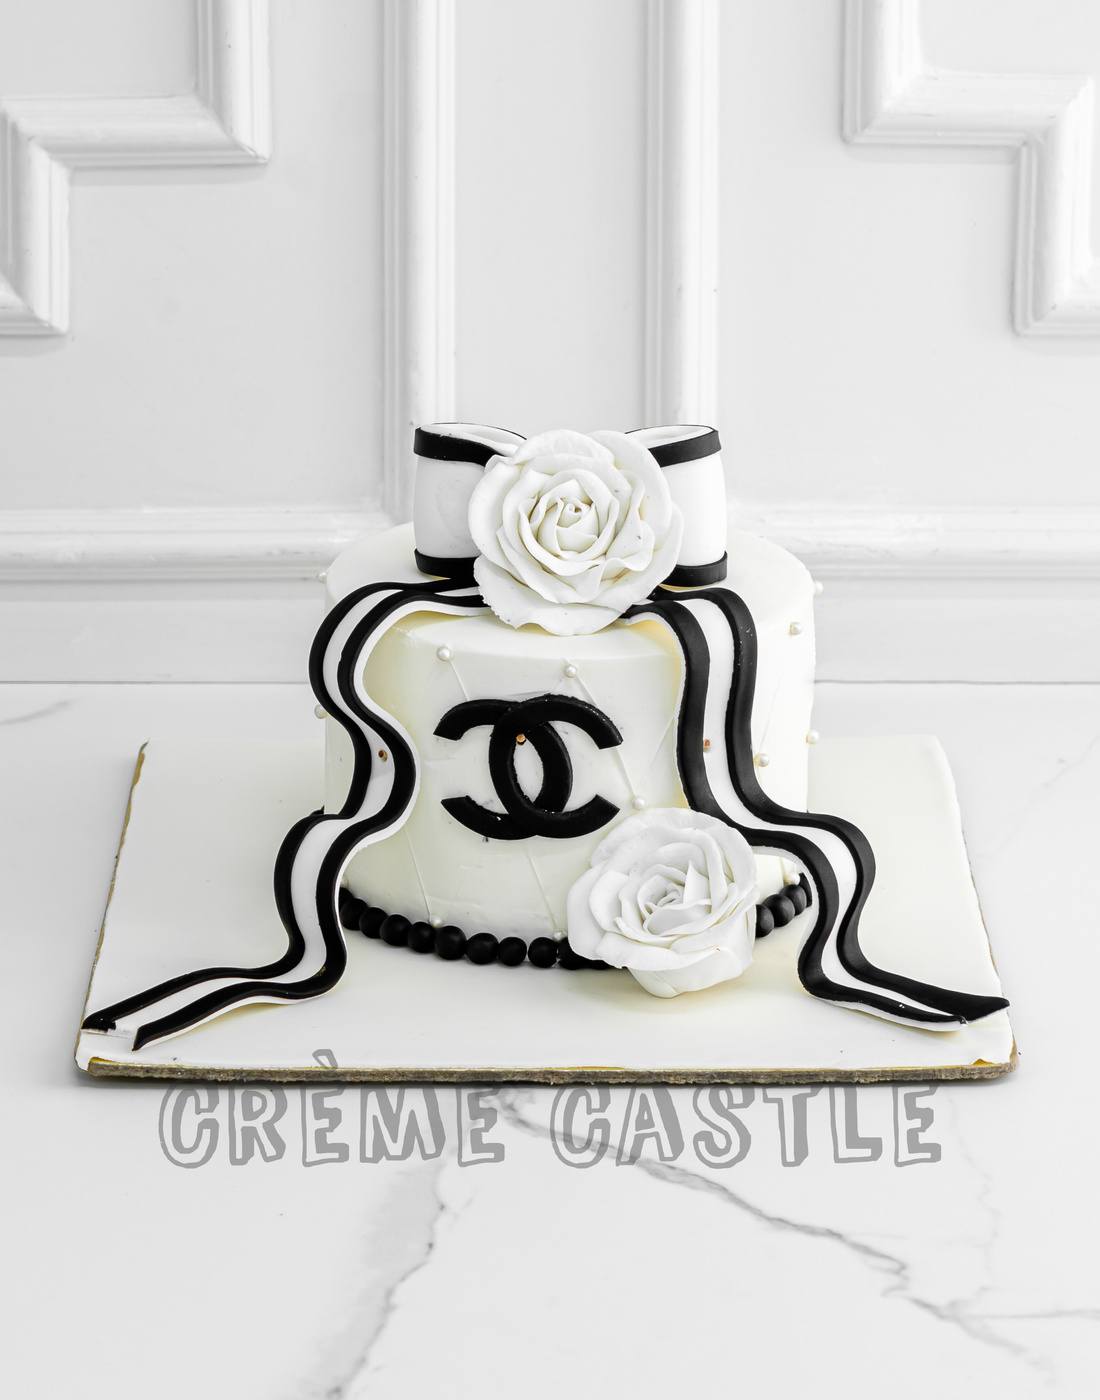 Chanel theme birthday cake. All edible including chocolate shoe! | Girly birthday  cakes, Chanel birthday cake, 40th birthday cakes